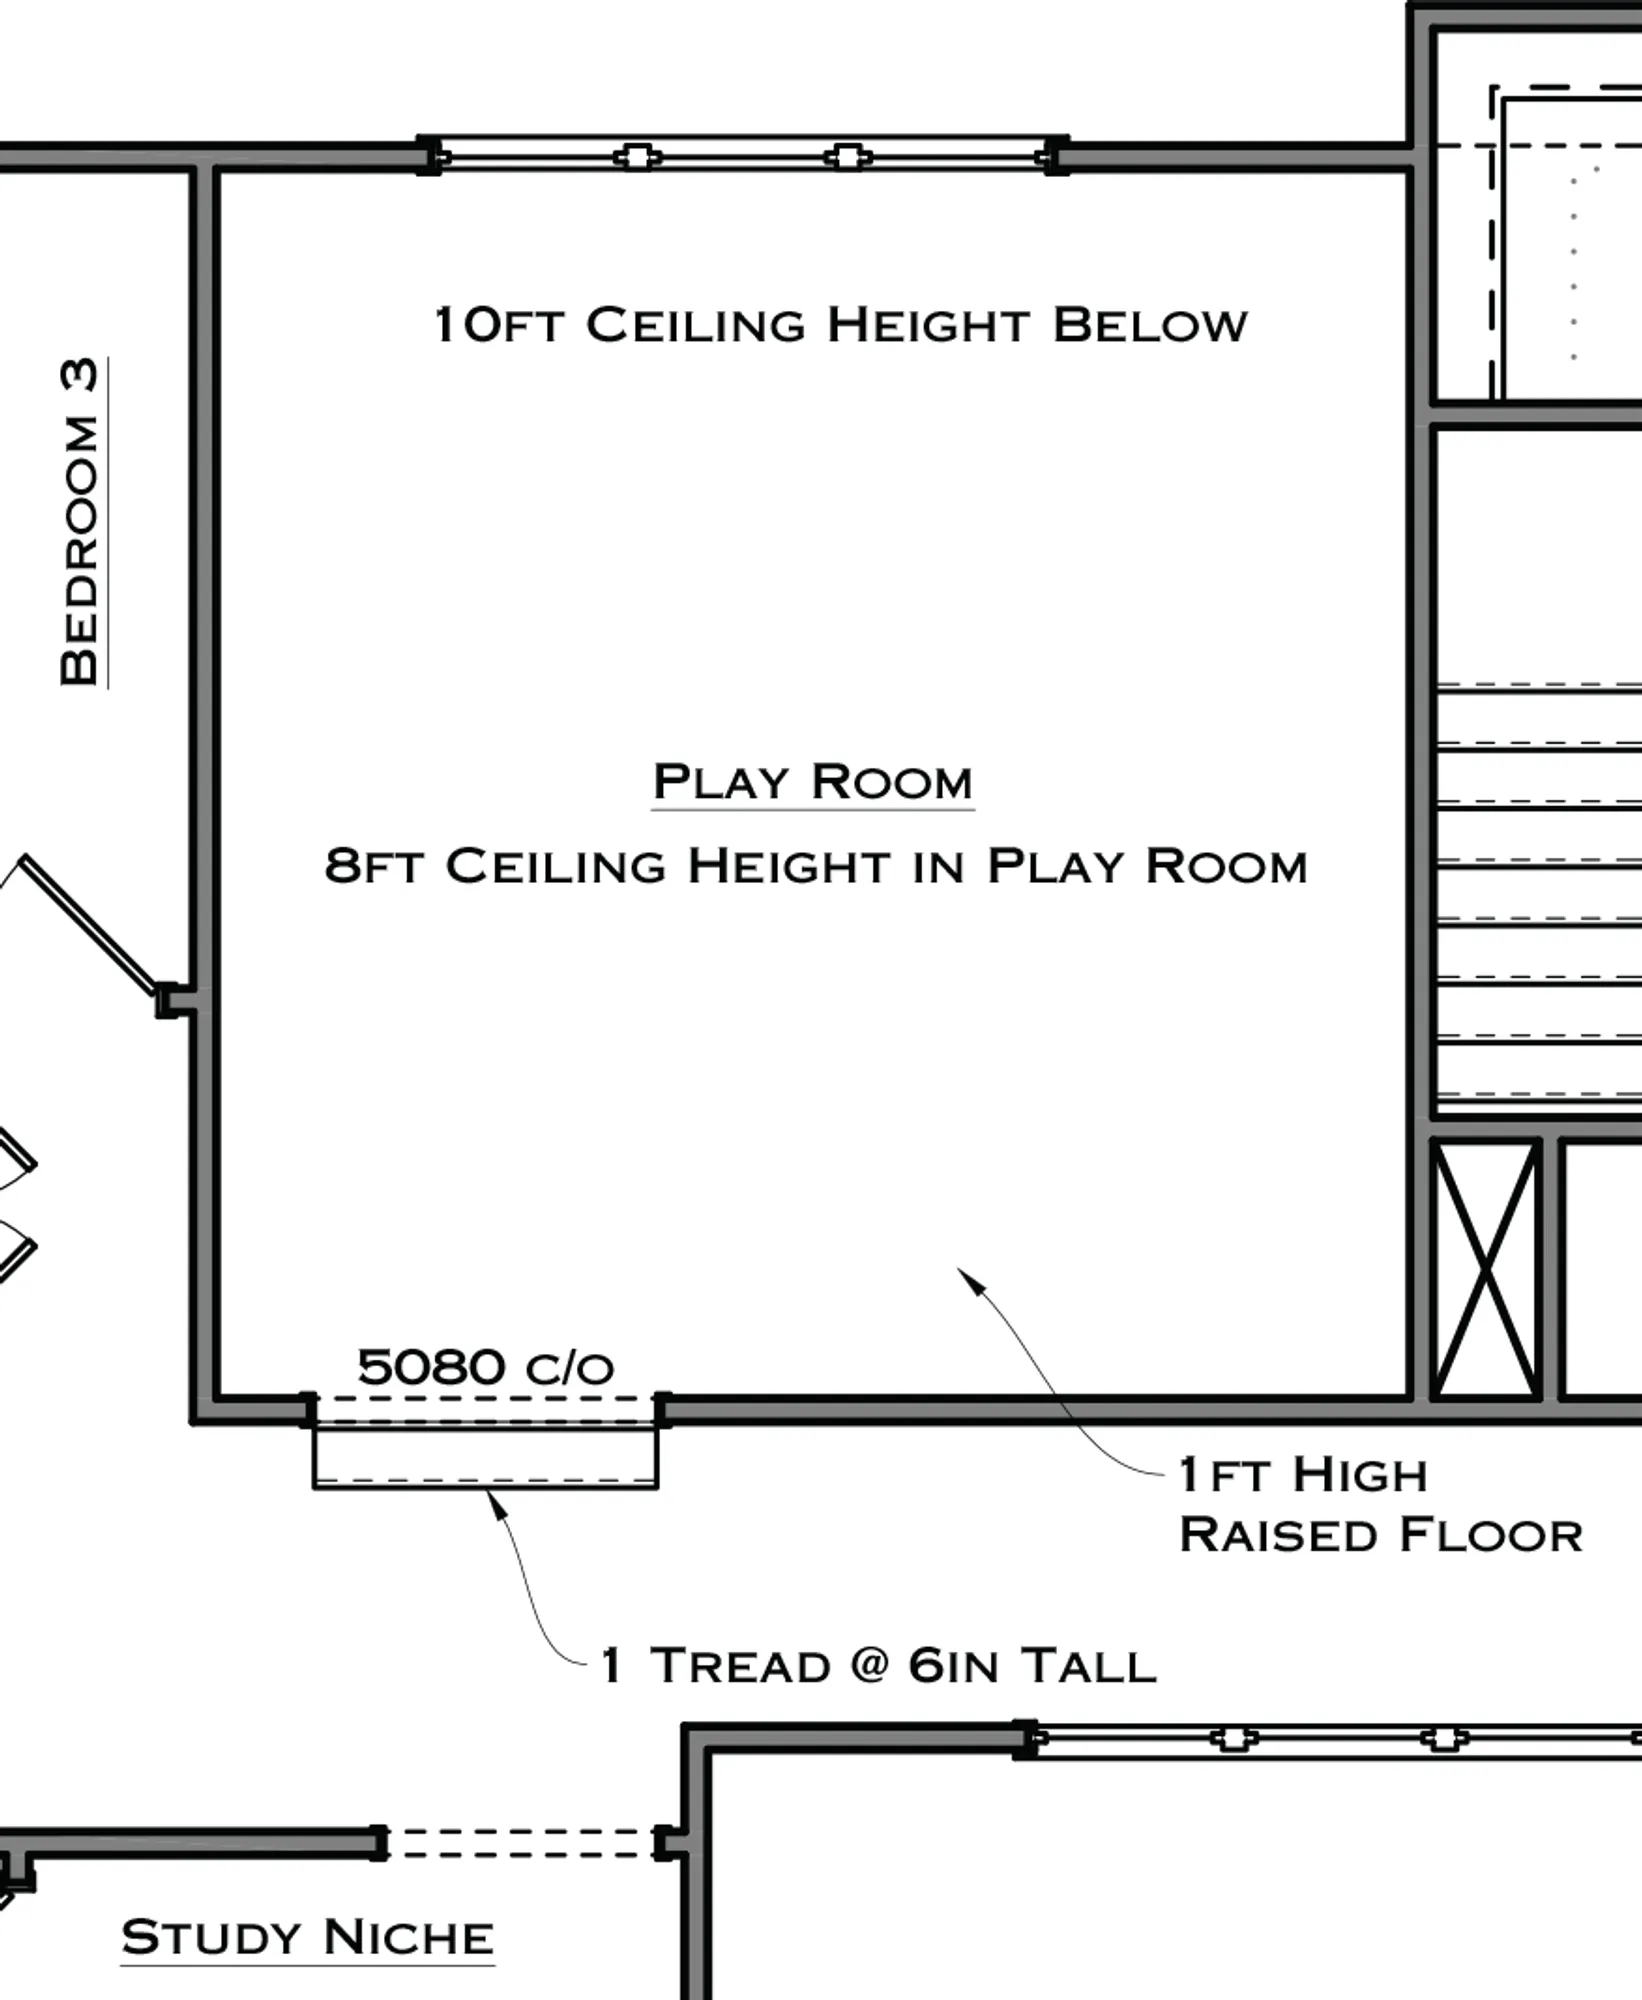 Play Room Option - undefined